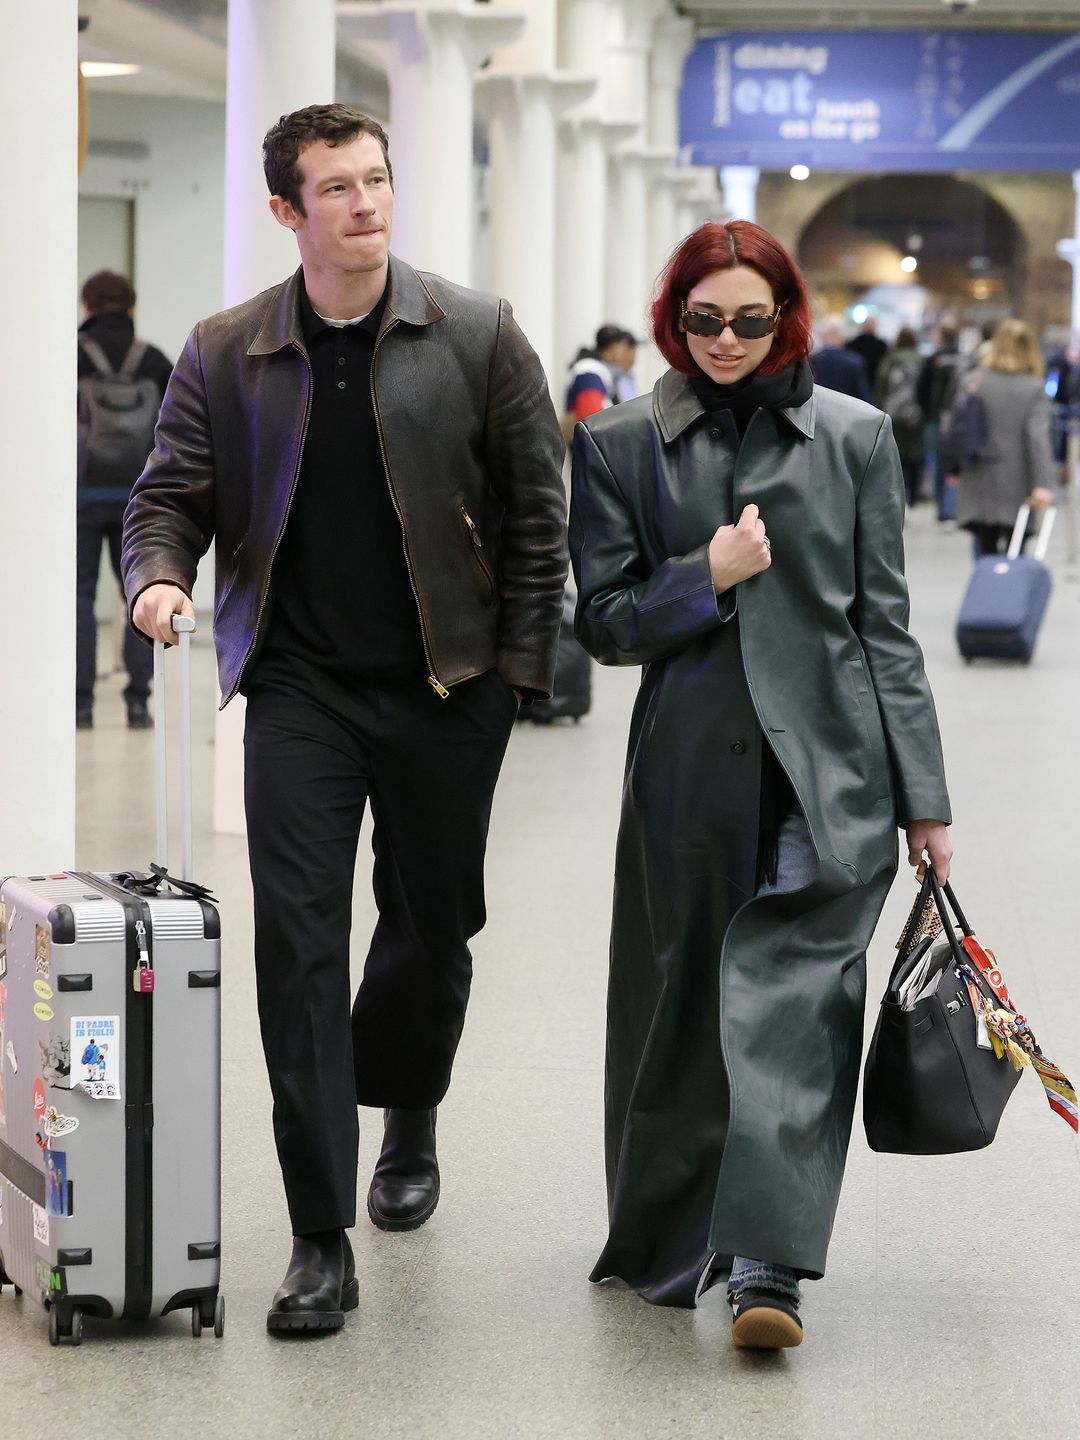 Dua Lipa and Callum Turner arriving at London St Pancras Station after taking the Eurostar from Paris